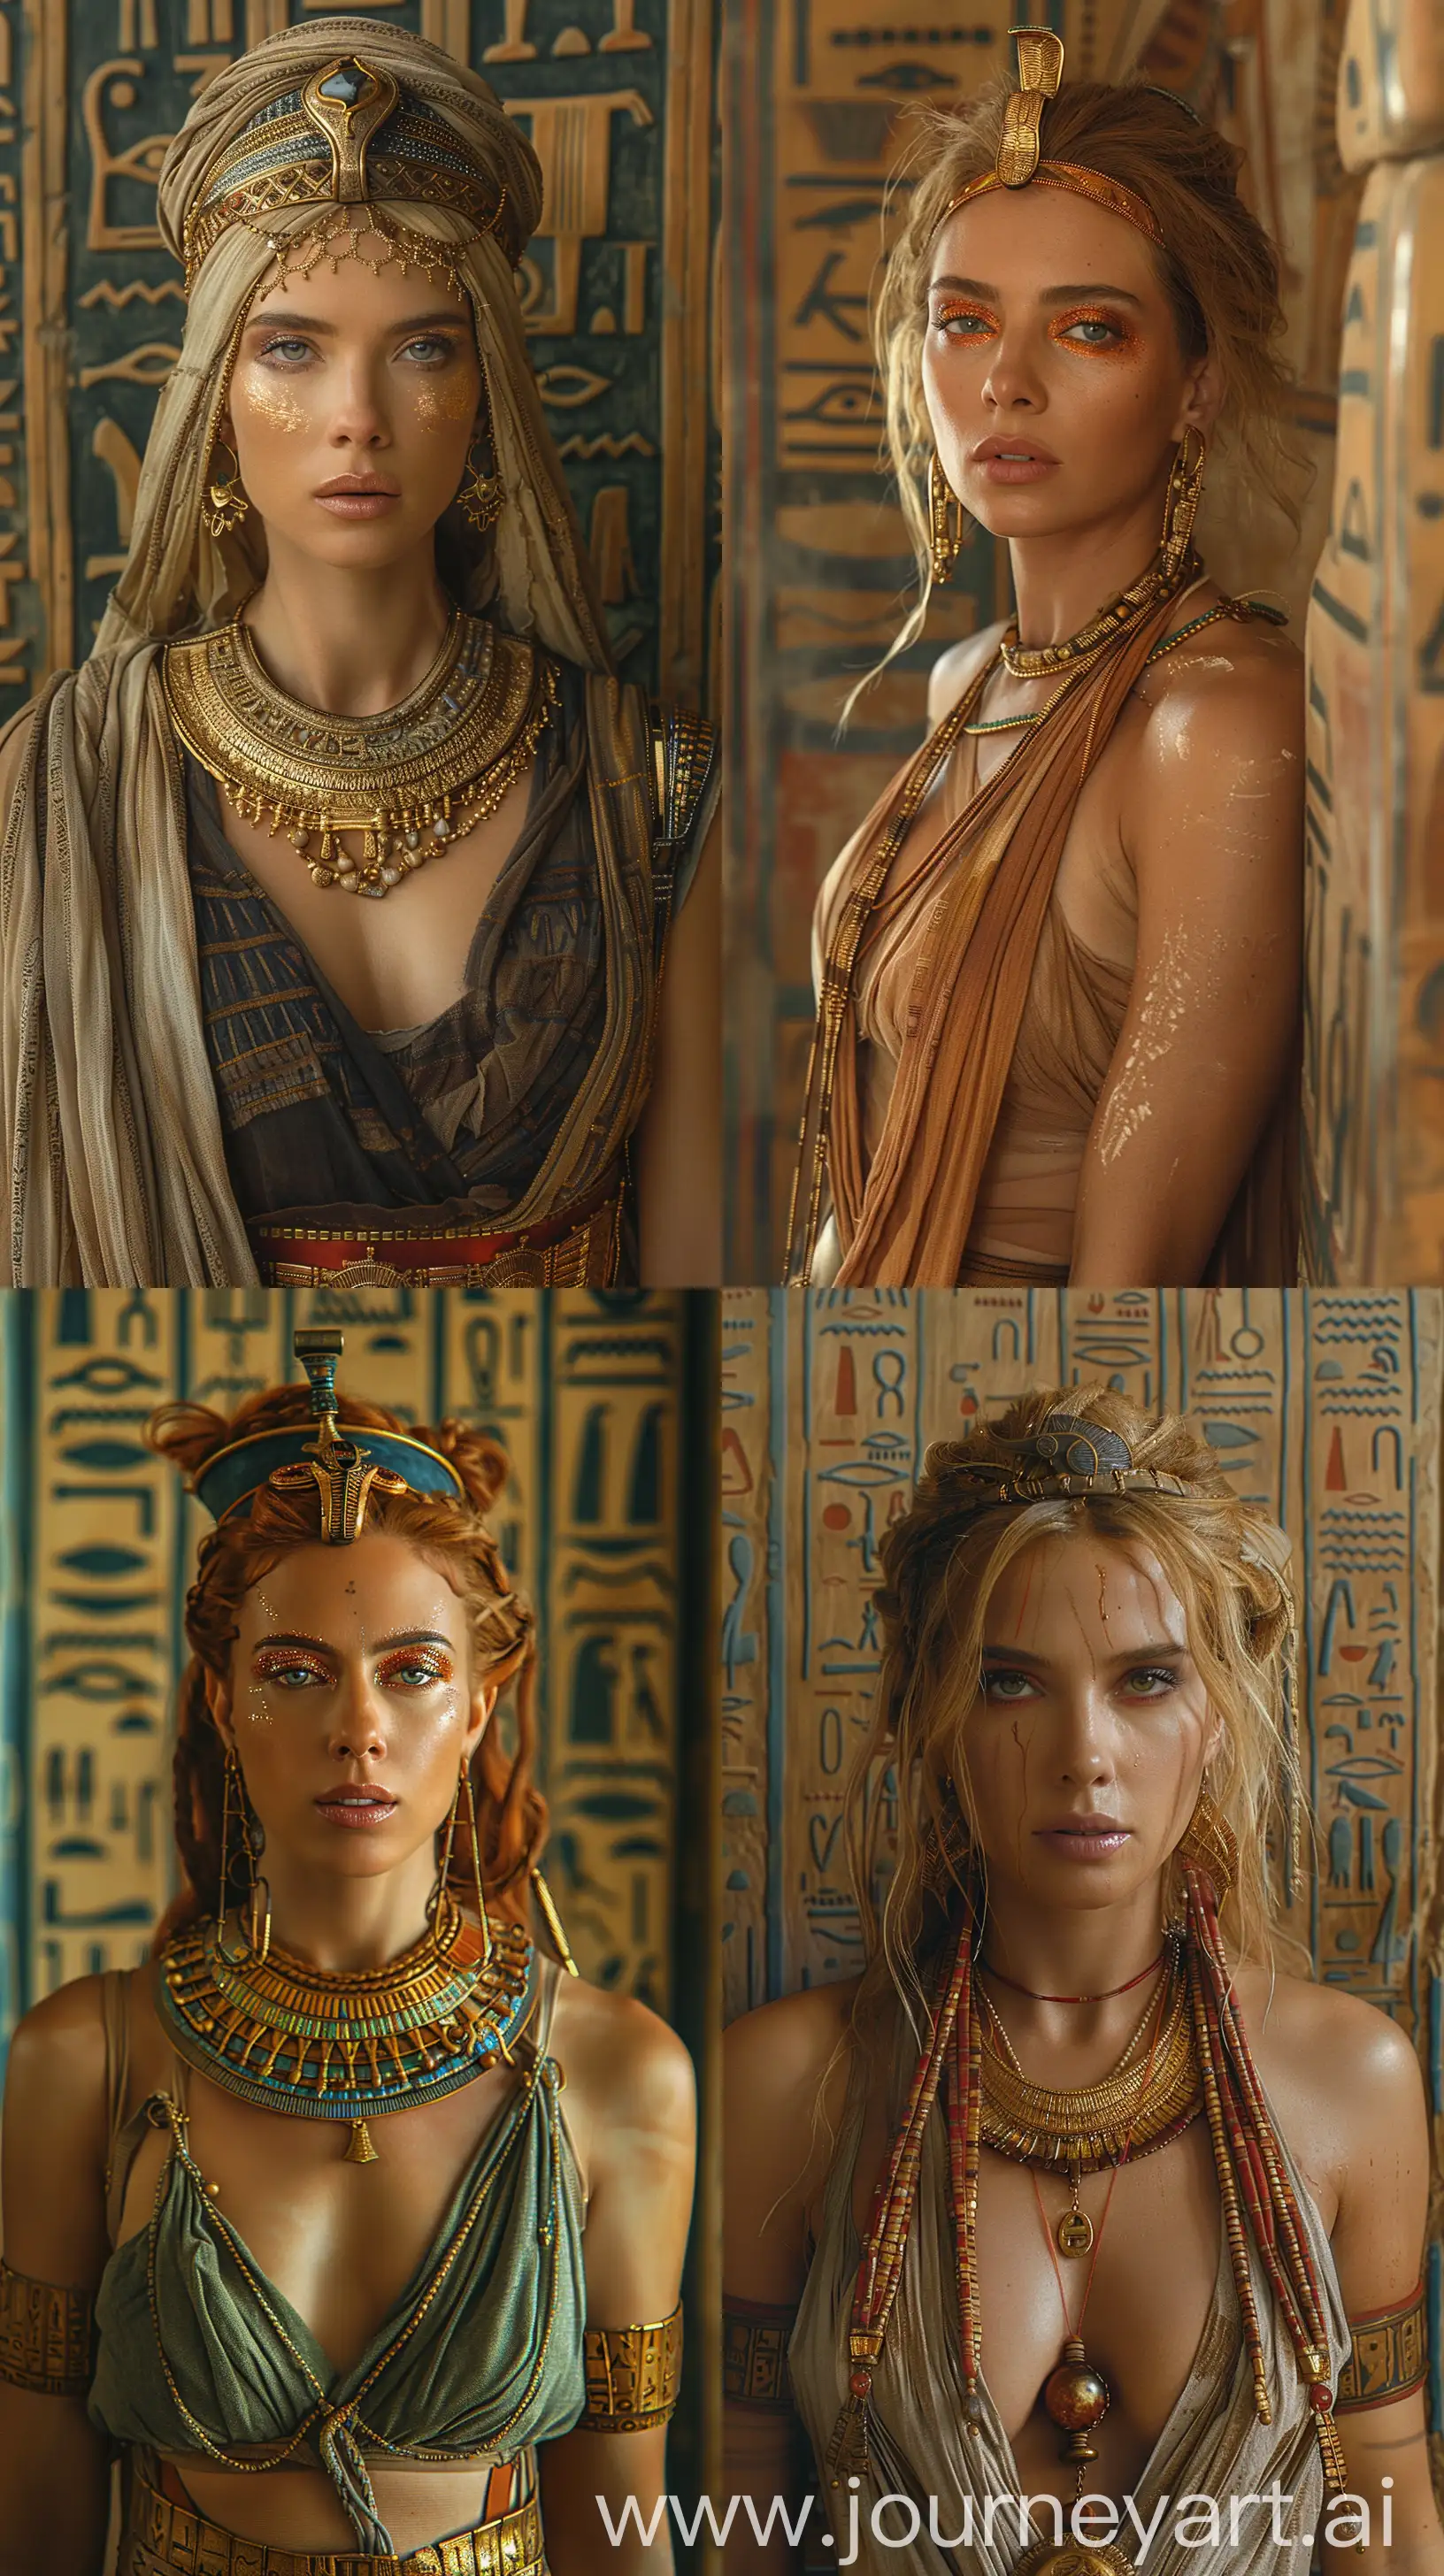 Scarlett Johansson portrayed as a regal Egyptian queen, adorned with ornate gold jewelry, dramatic eye makeup characteristic of Ancient Egypt, set against hieroglyph-adorned walls, stylized oil painting --ar 9:16 --s 750 --v 6